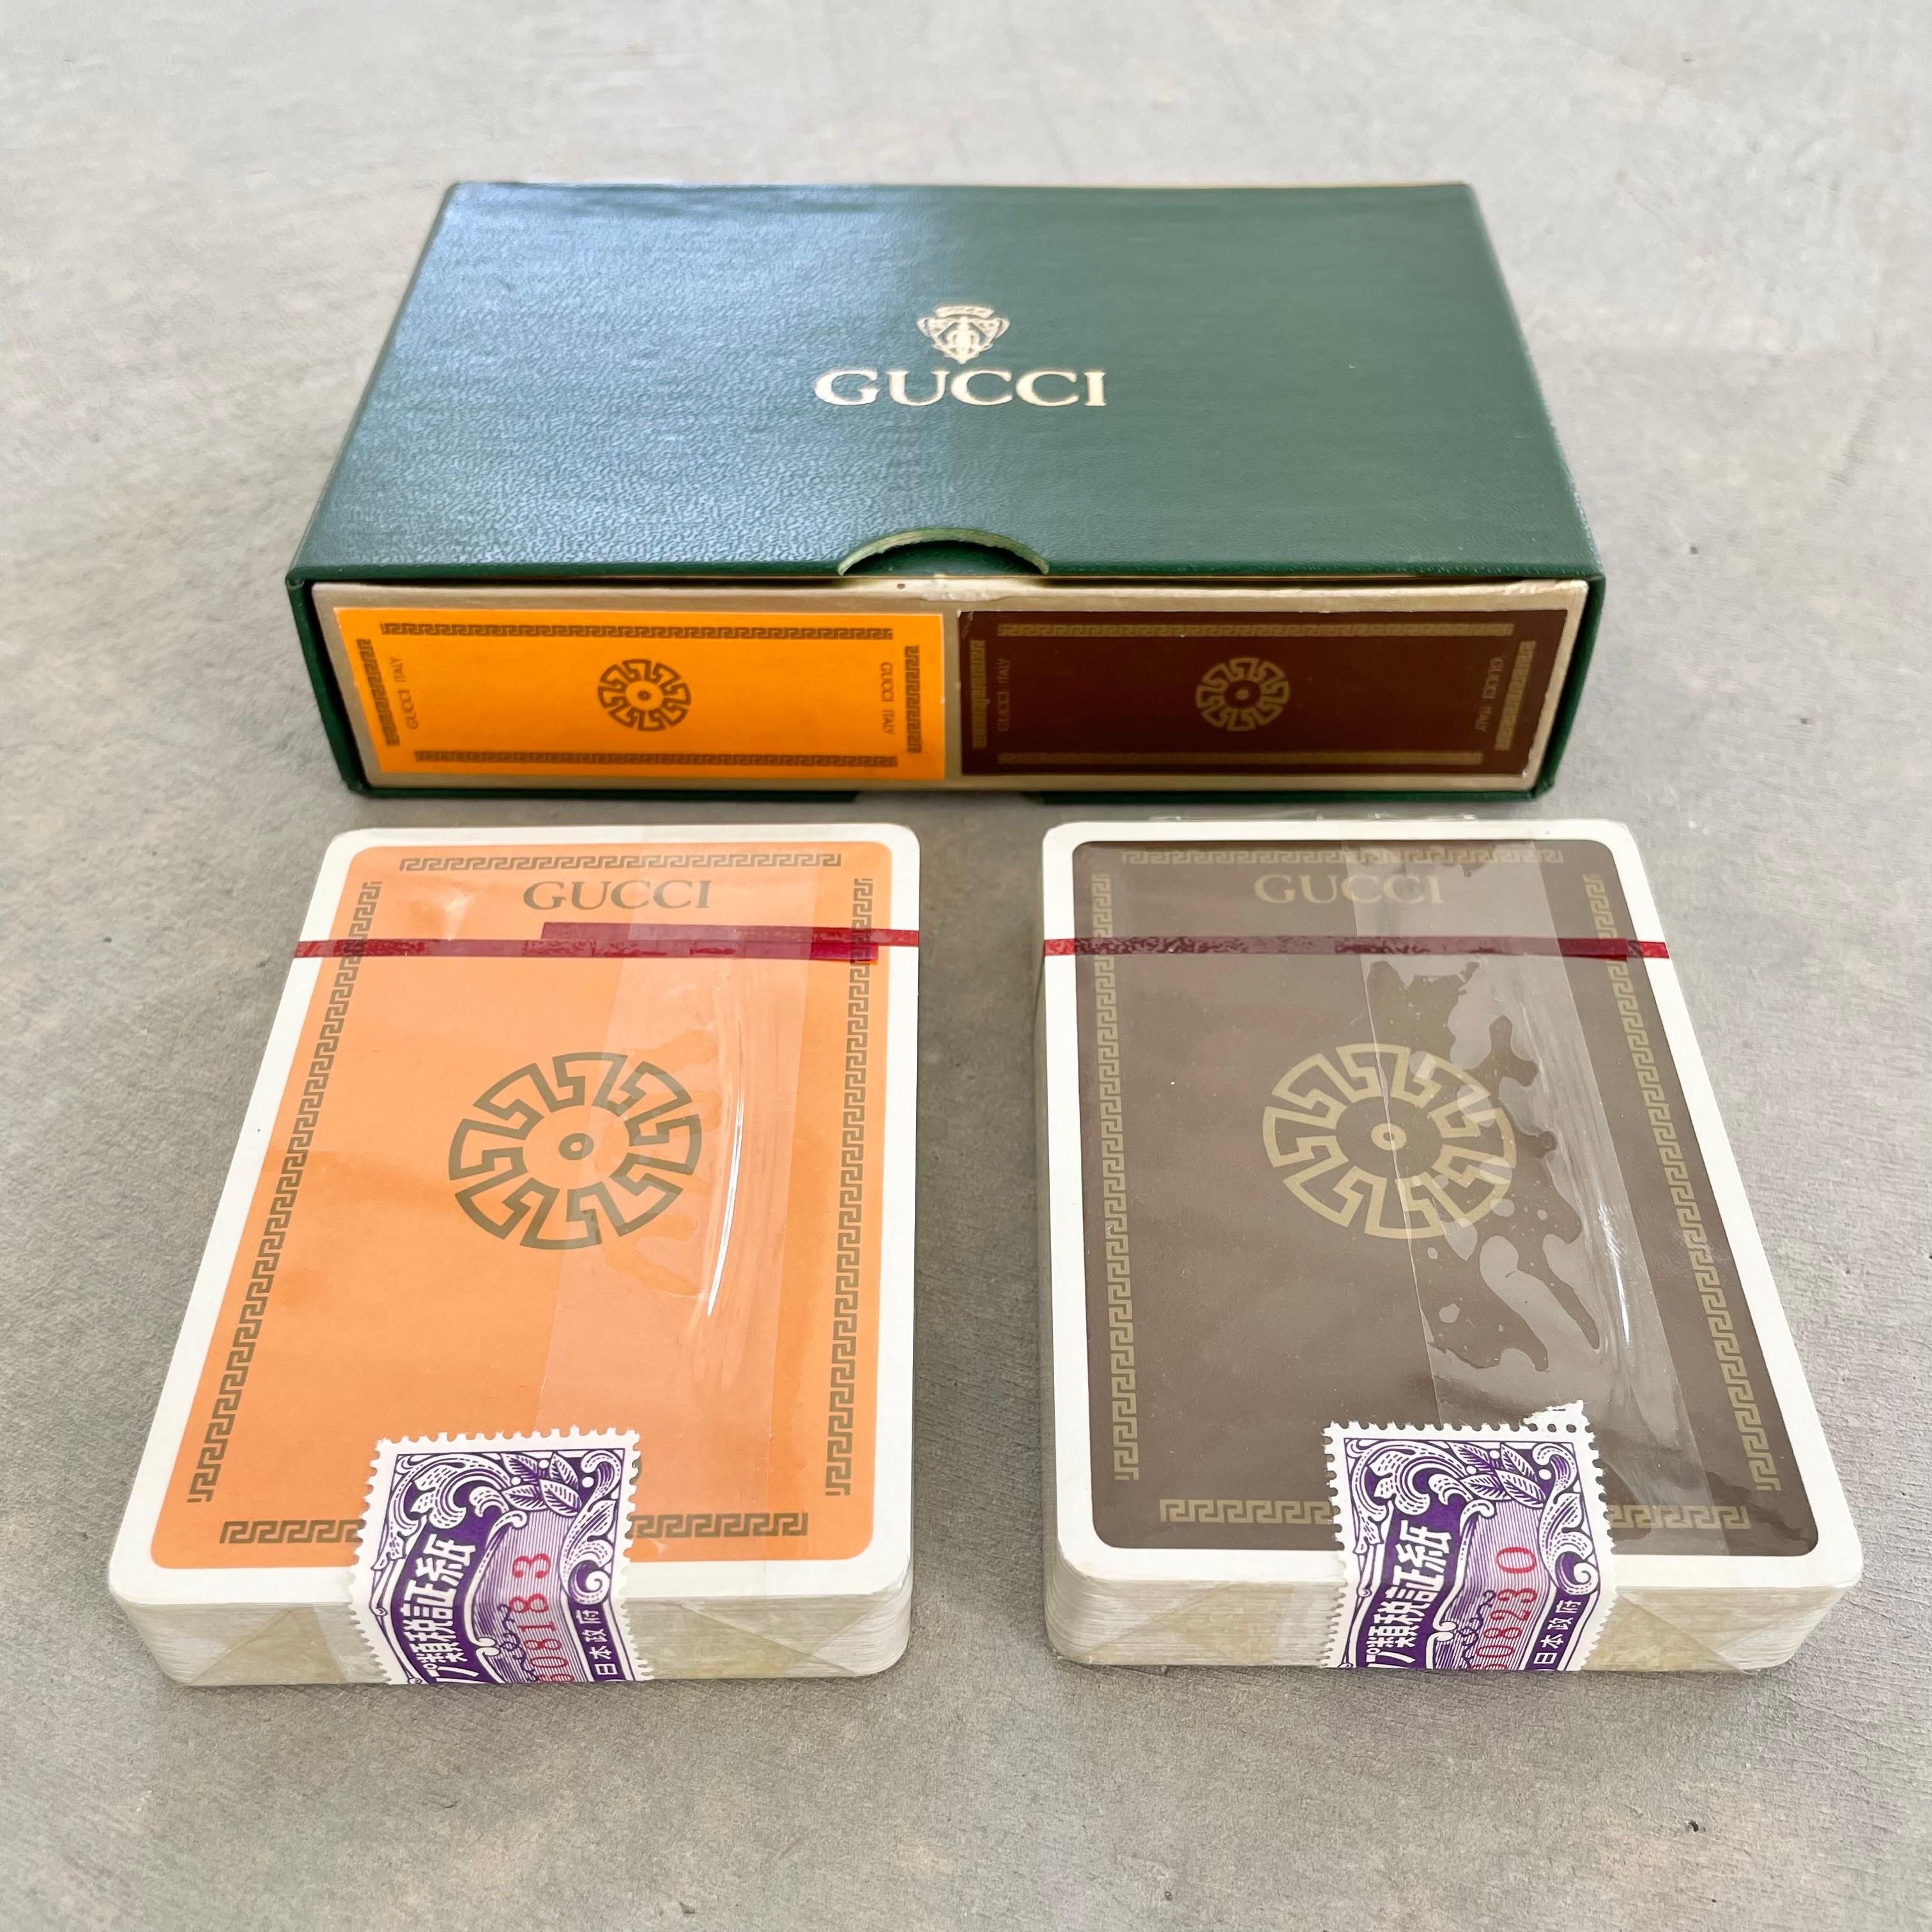 Gucci playing cards in the original box and original wrapping. Made in Italy, circa 1970s. Both sets are sealed and un-used with serial numbers on seal. Gucci knight logo stamped on the shell of the green leather case. There is a brown deck and a